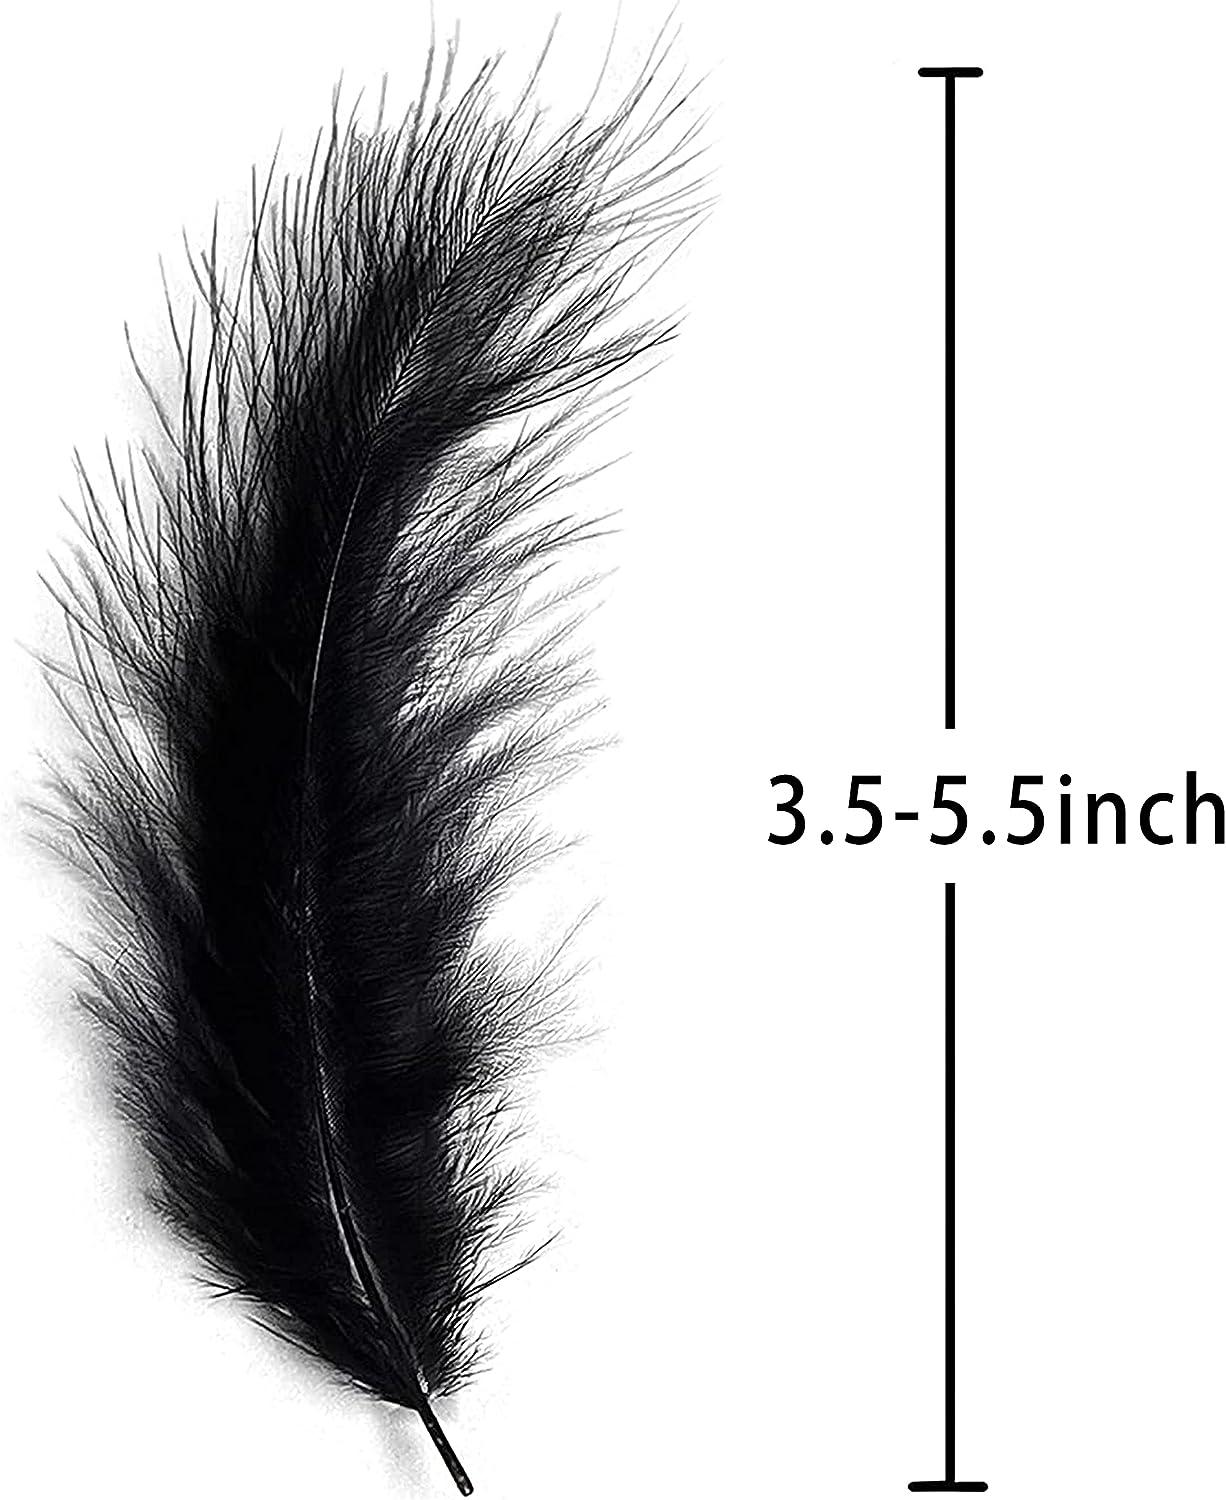 100pcs 4-6 Black Feathers for Crafts and Dreamcatcher Making